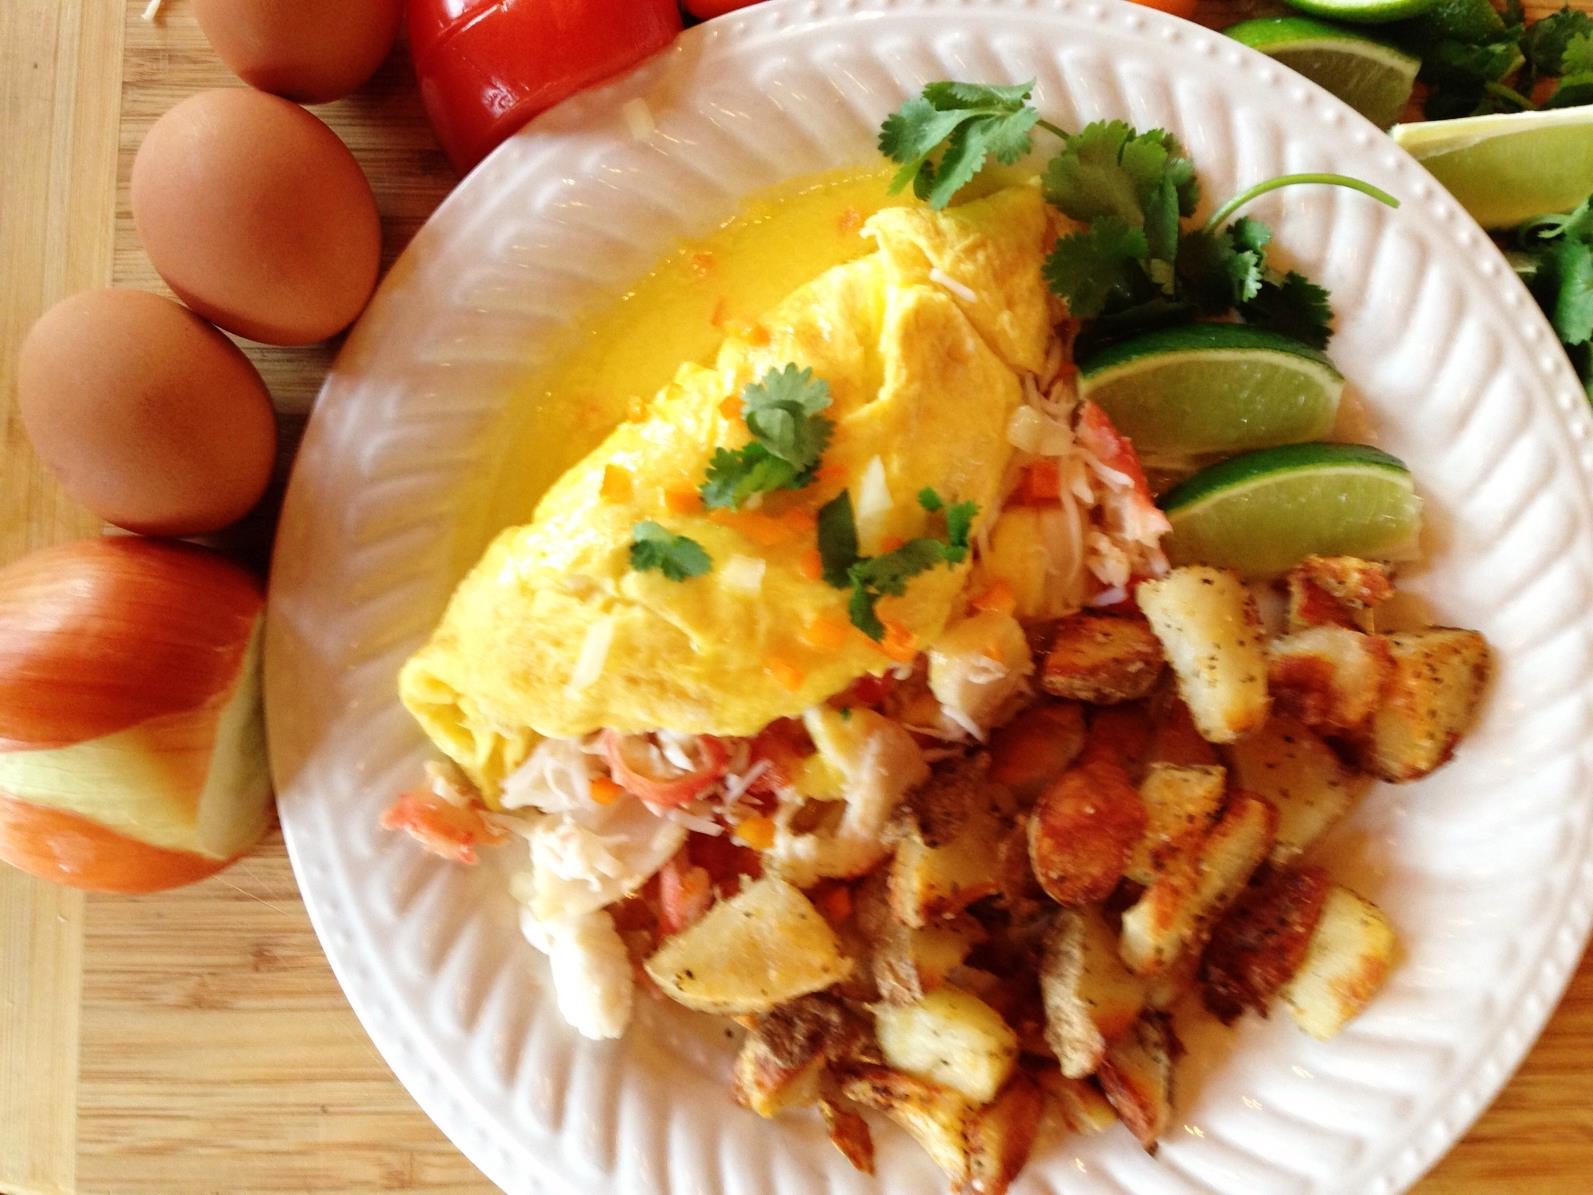 Example of one of our breakfasts on a plate.  Omelete, potatoes, limes, garnish.